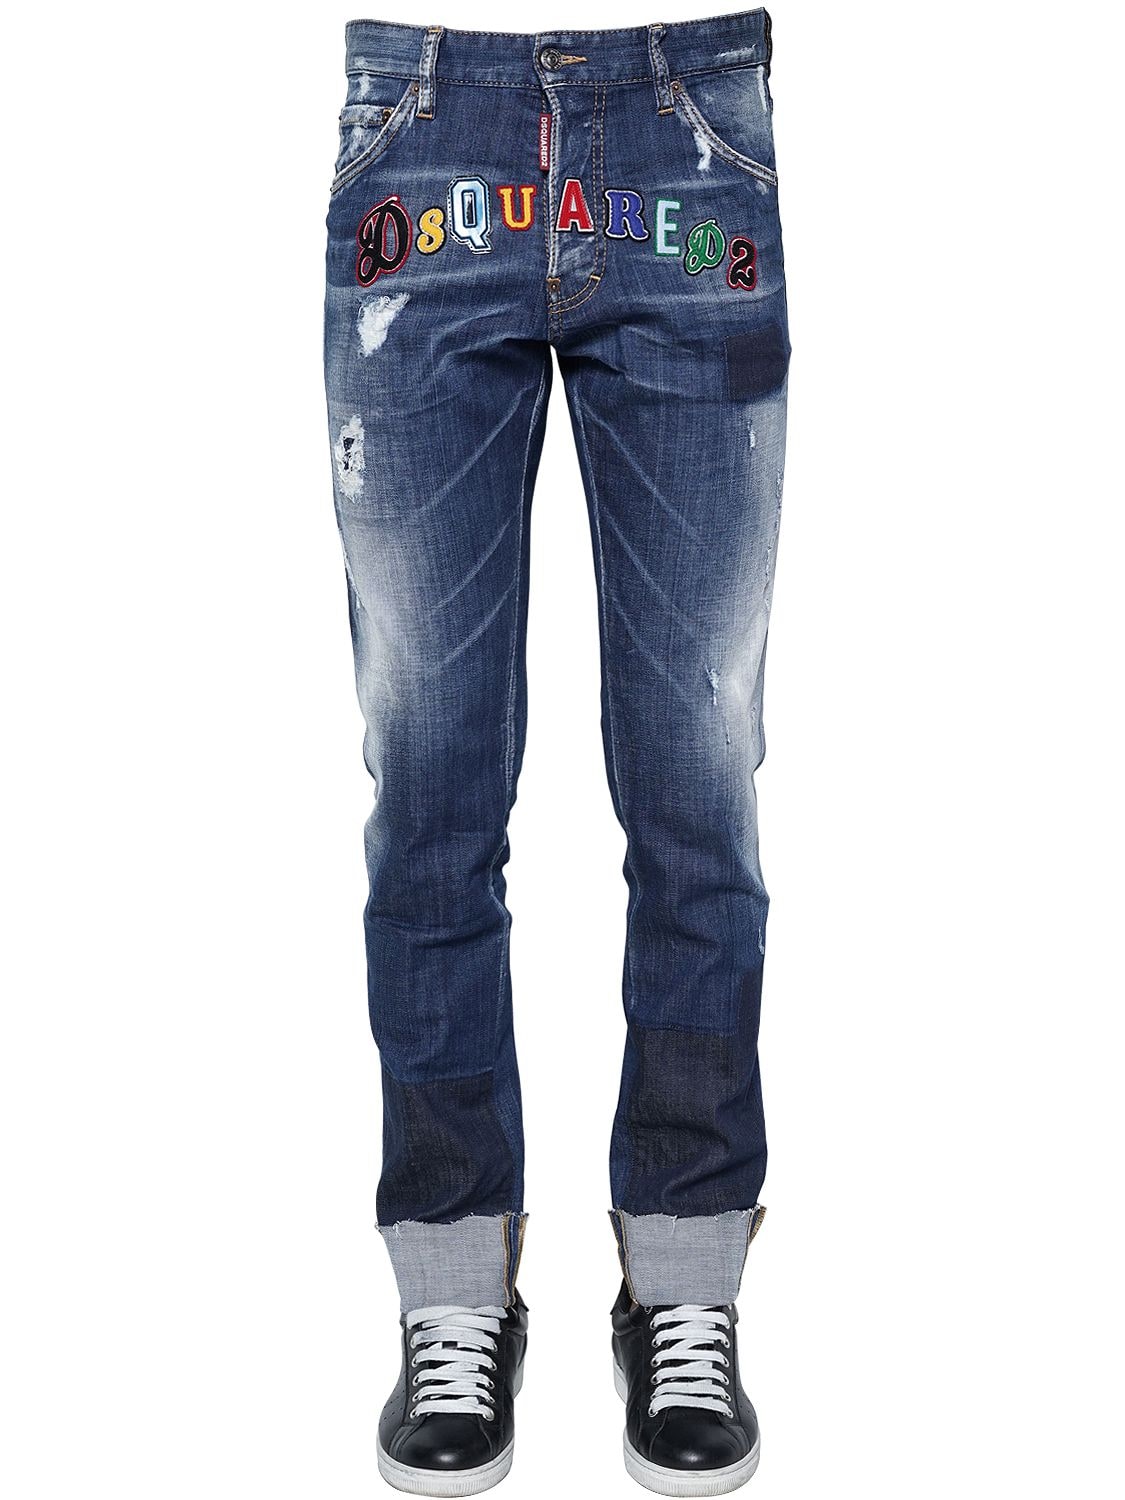 DSQUARED2 16.5CM COOL GUY LOGO PATCH DENIM JEANS,67IG7E029-NDCW0